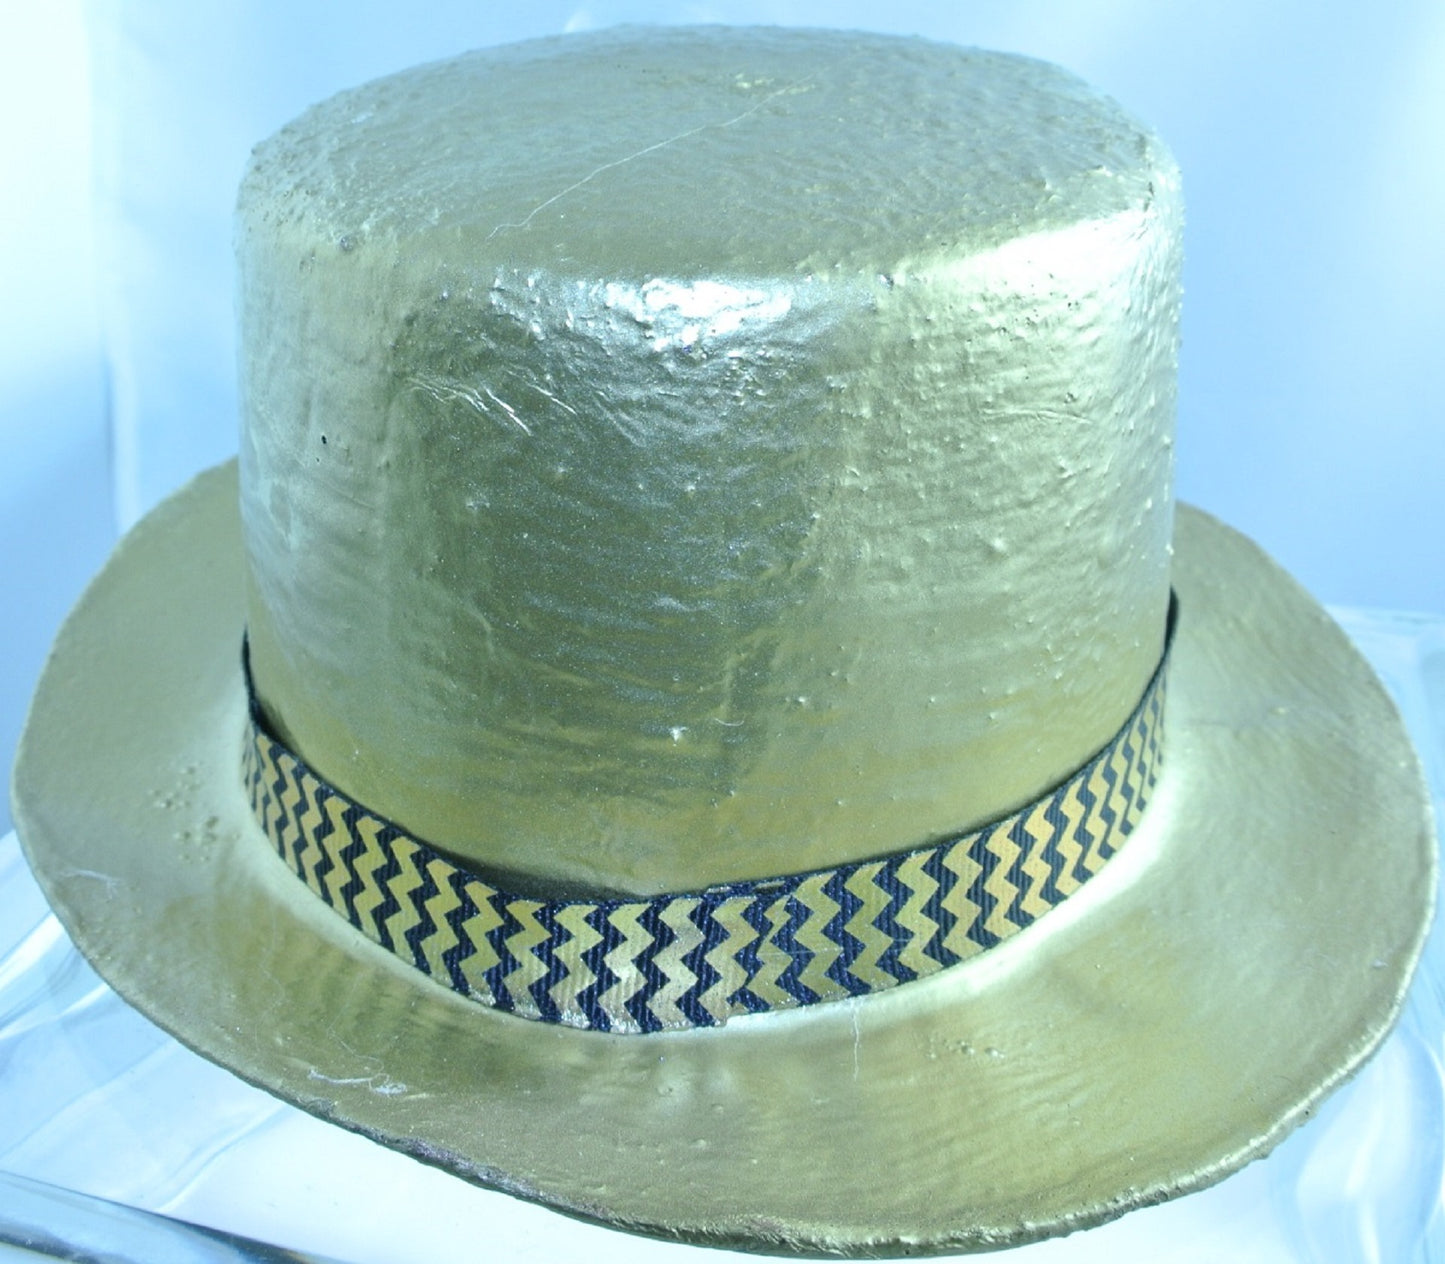 BRASS ROCKET FRONT GOLD BLACK ZIG ZAG RIBBON BAND LARGE TOP HAT STARR WILDE STEAMPUNK FORTRESS